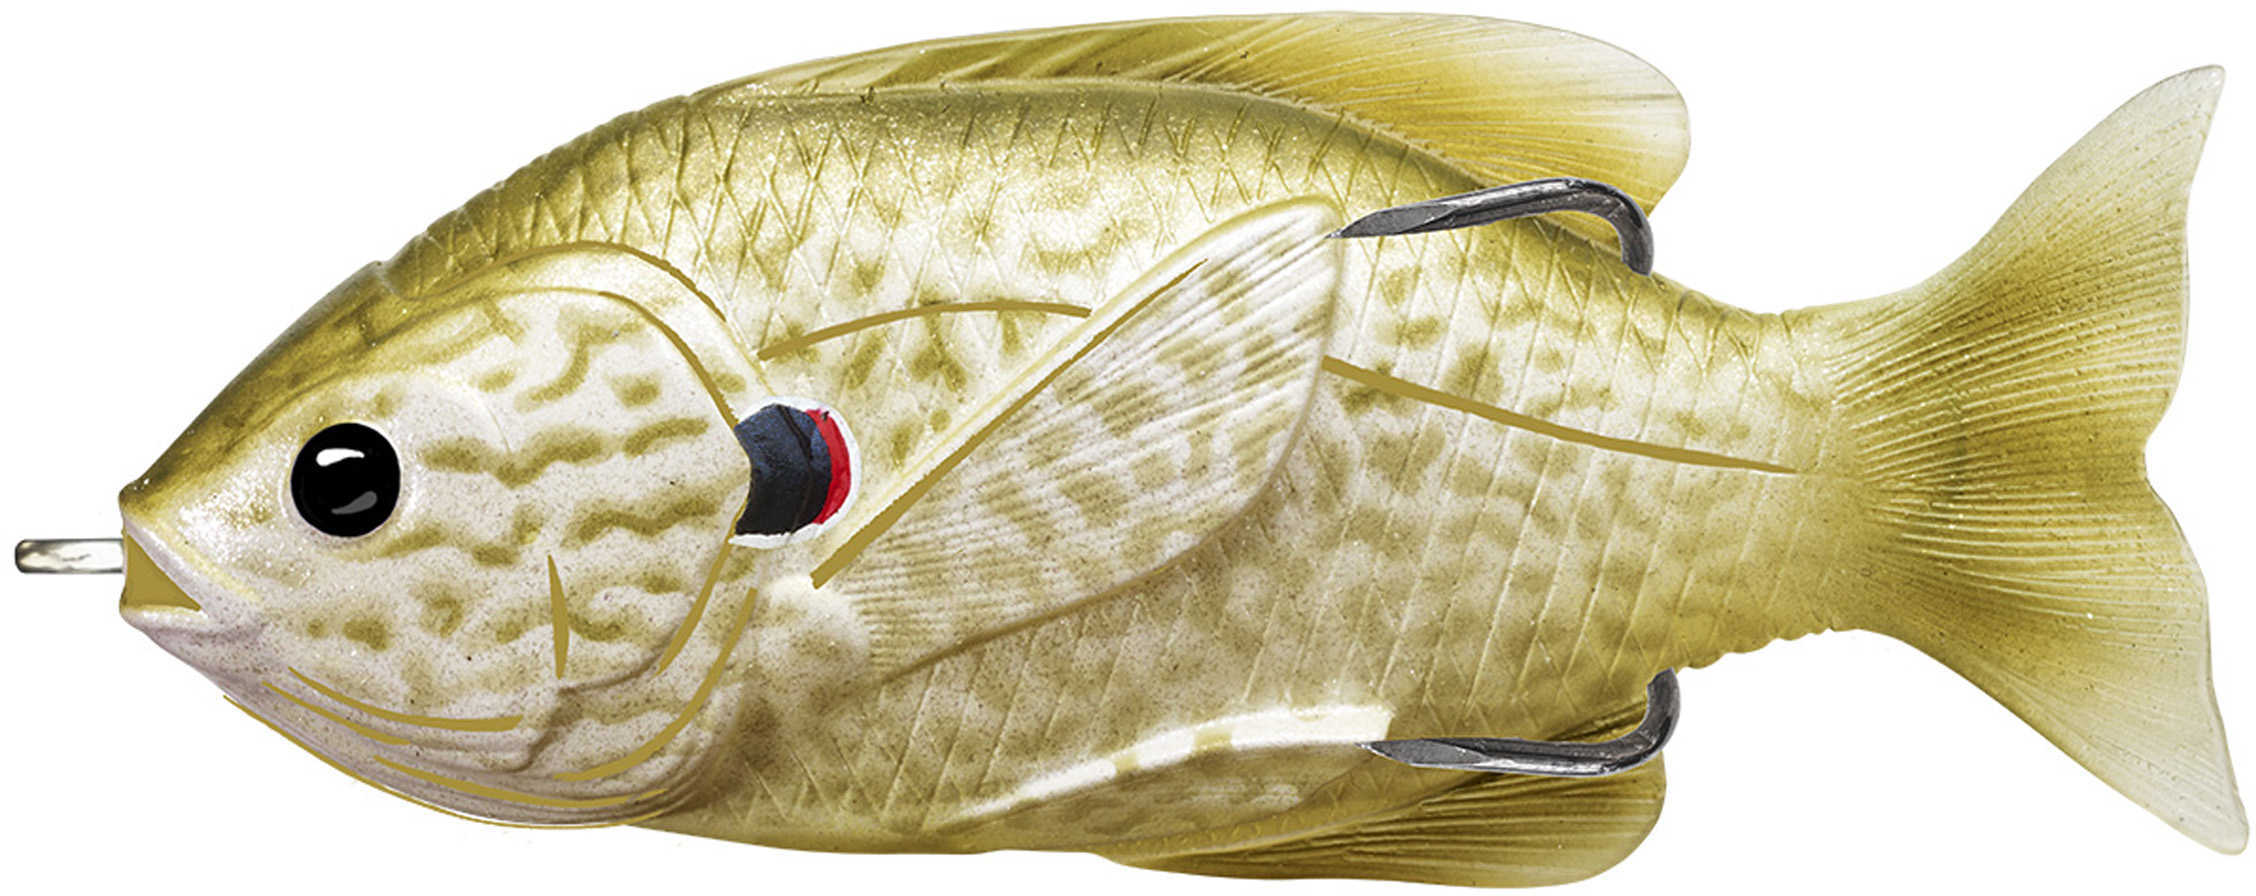 LIVETARGET Lures / Koppers Fishing and Tackle Corp Sunfish Hollow Body 3" Number 3/0 Hook Size Topwater Depth Pearl/Olive Pumpkinseed